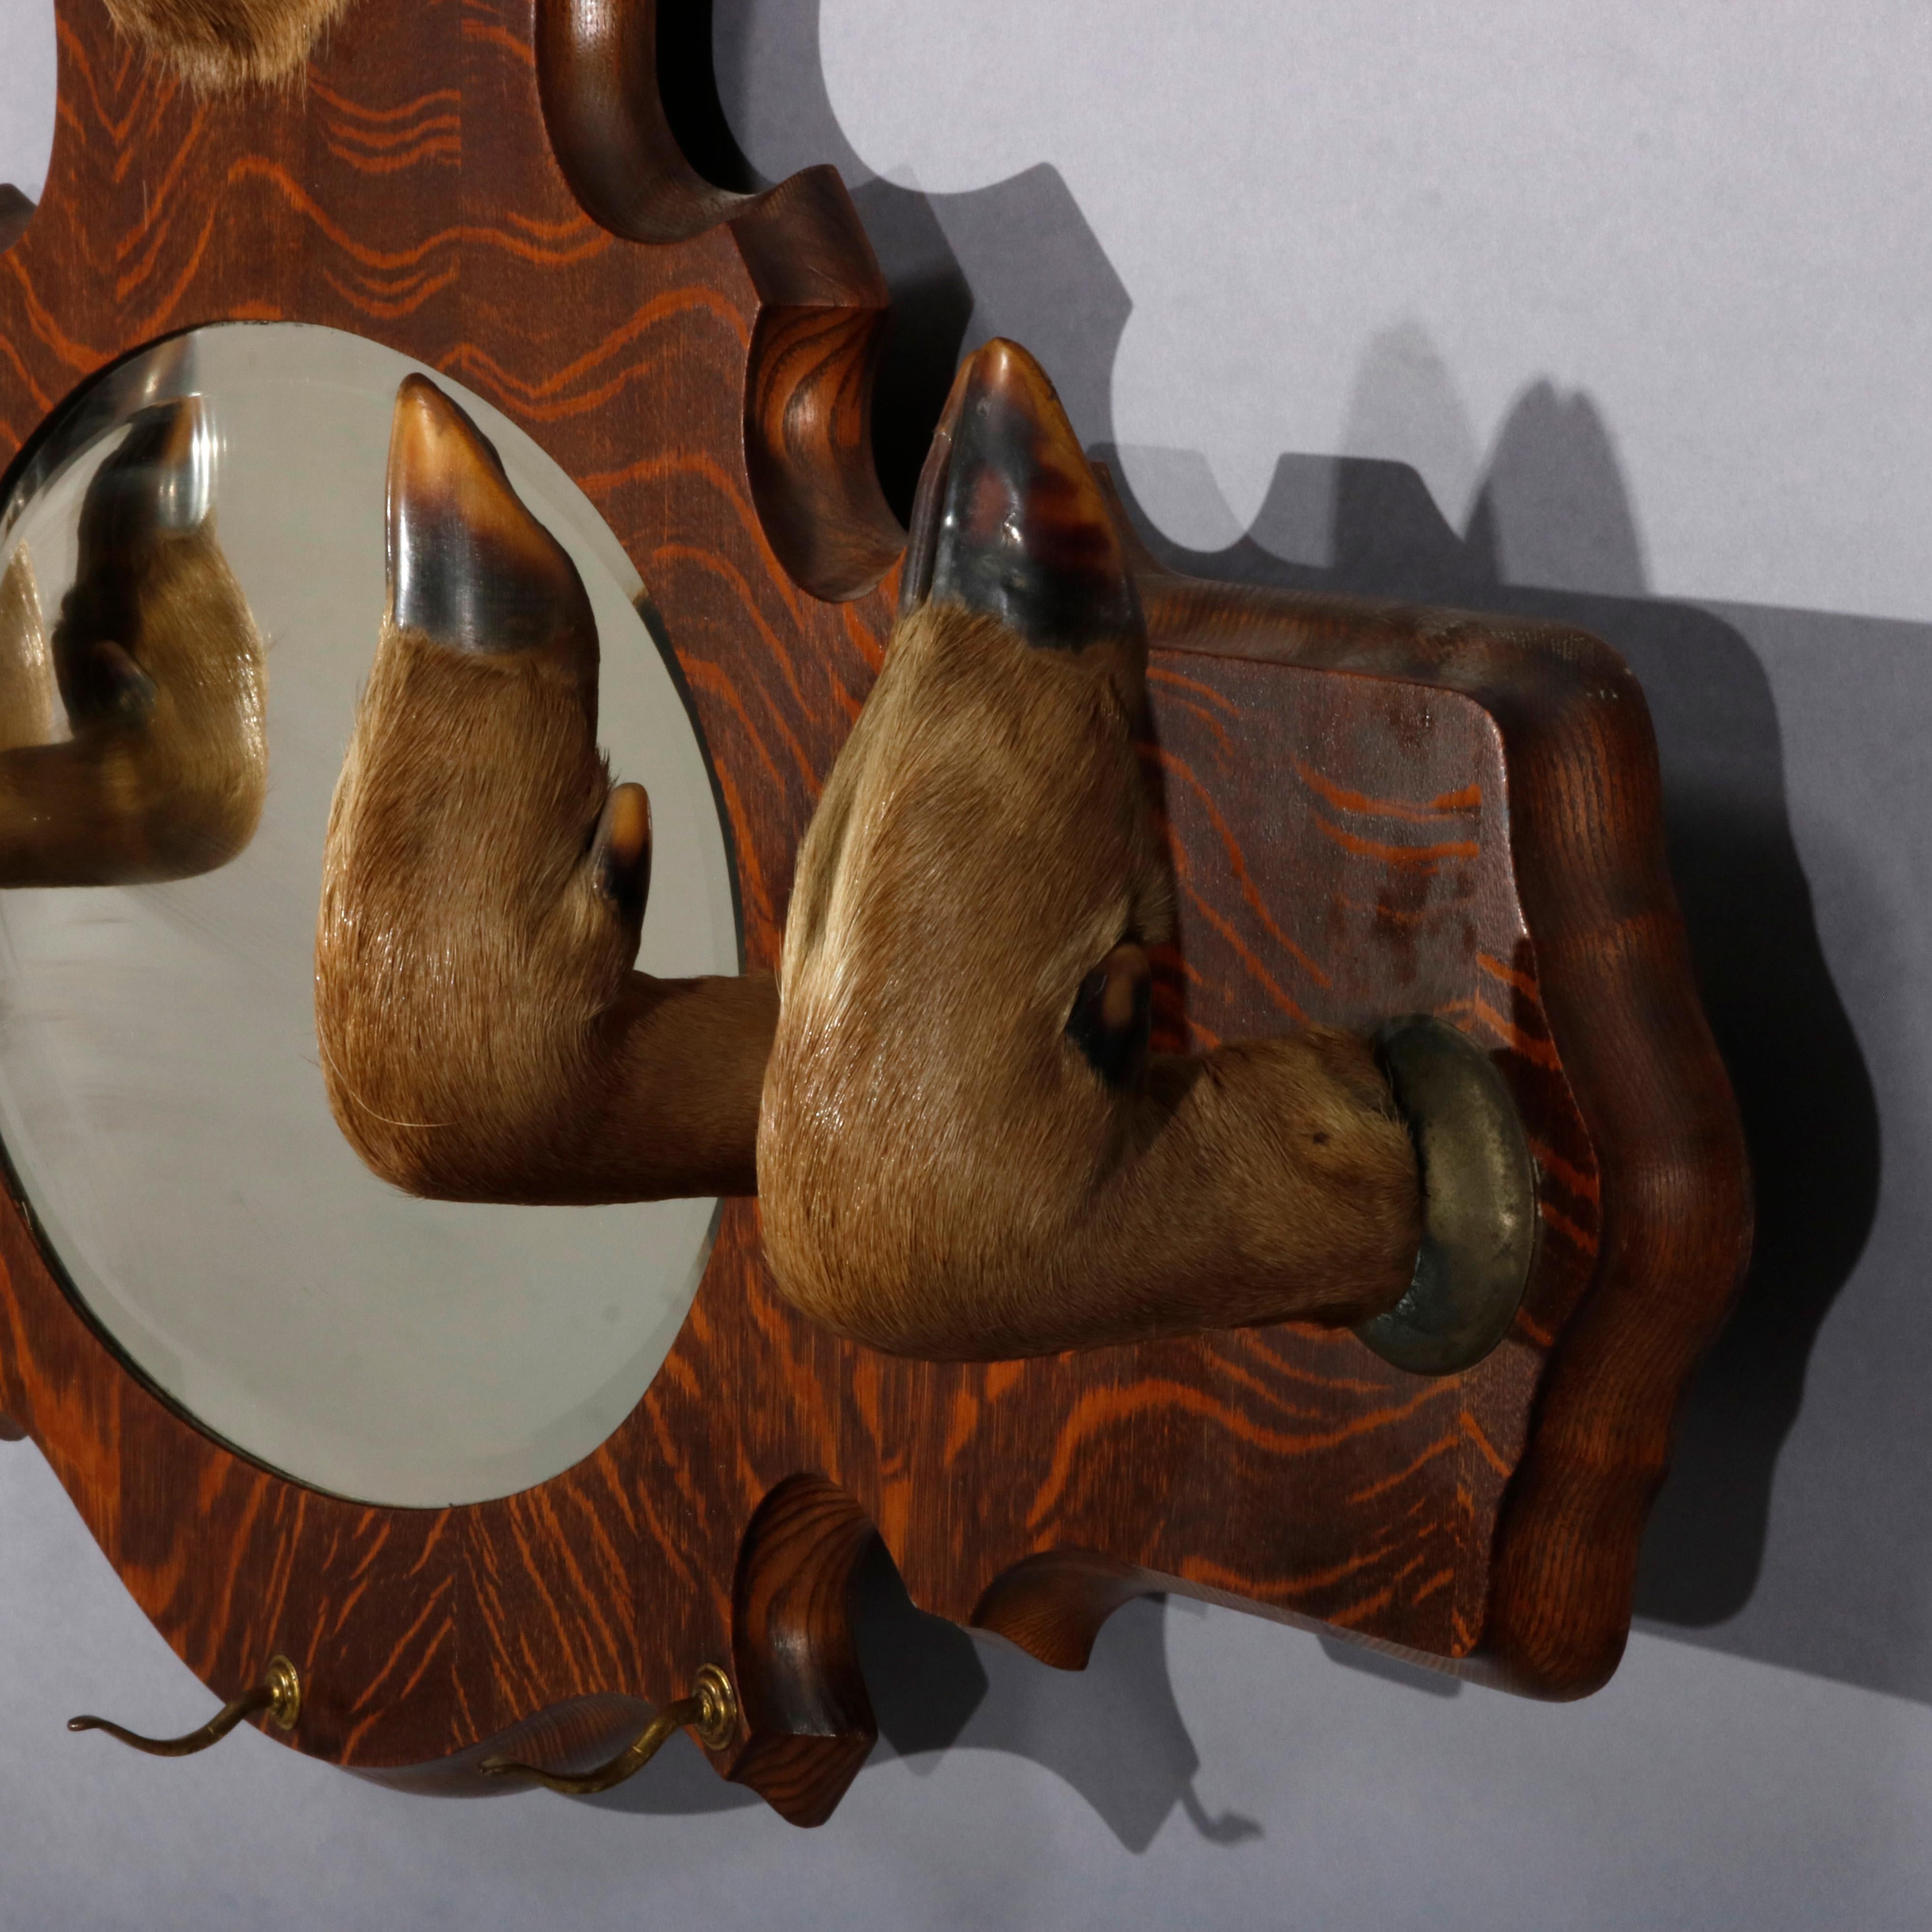 American DIMS Vintage Taxidermy Deer Wall Mount Hat Rack with Mirror, circa 1940